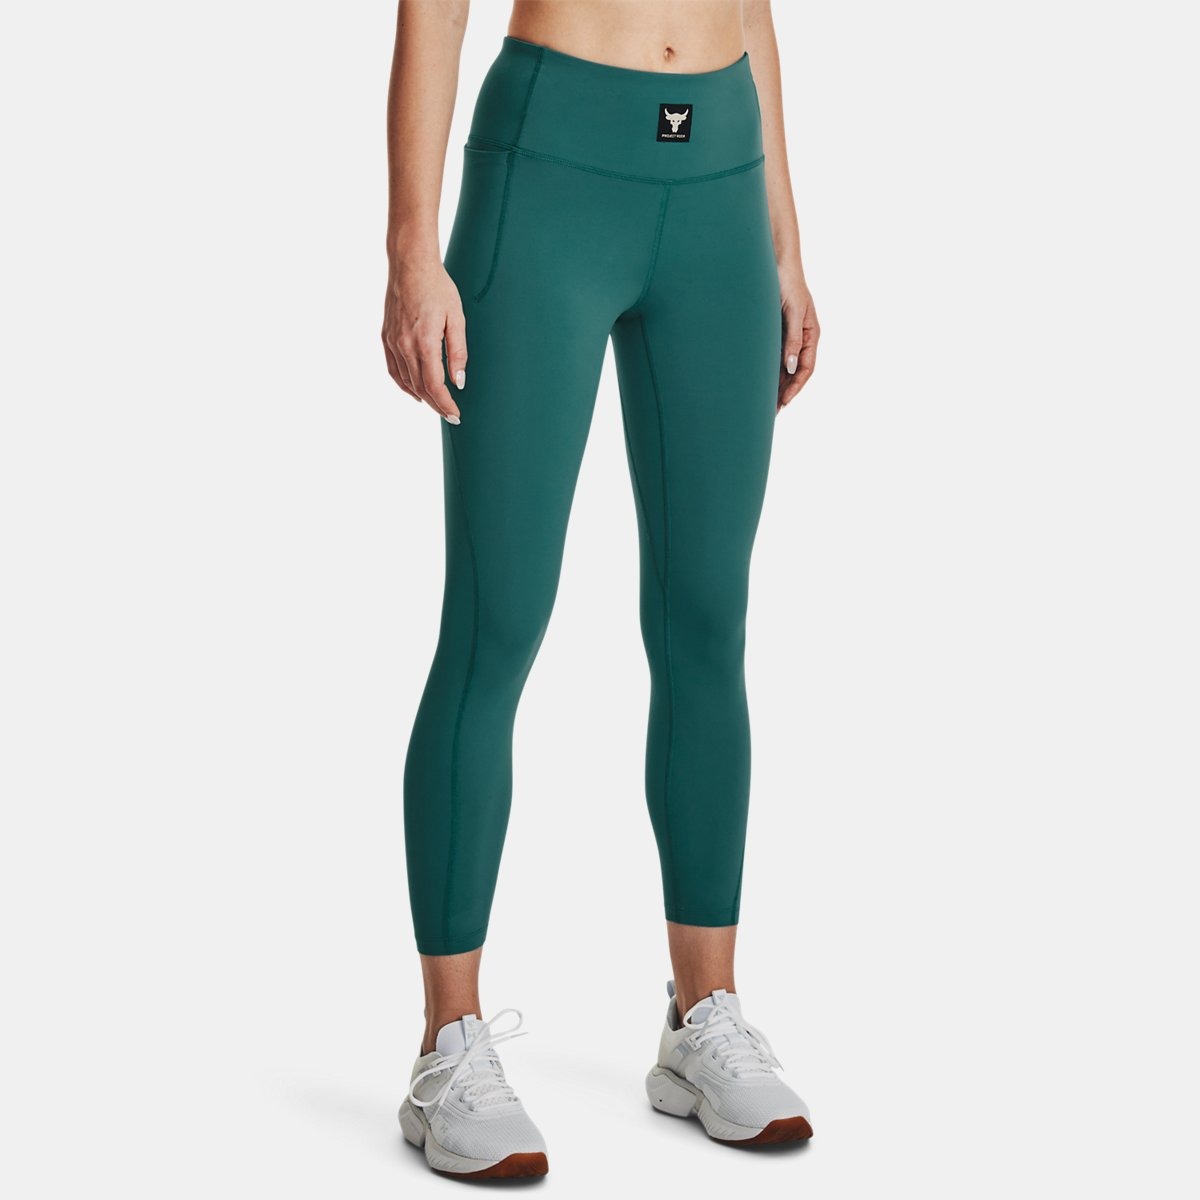 Green Leggings for Woman at Under Armour GOOFASH